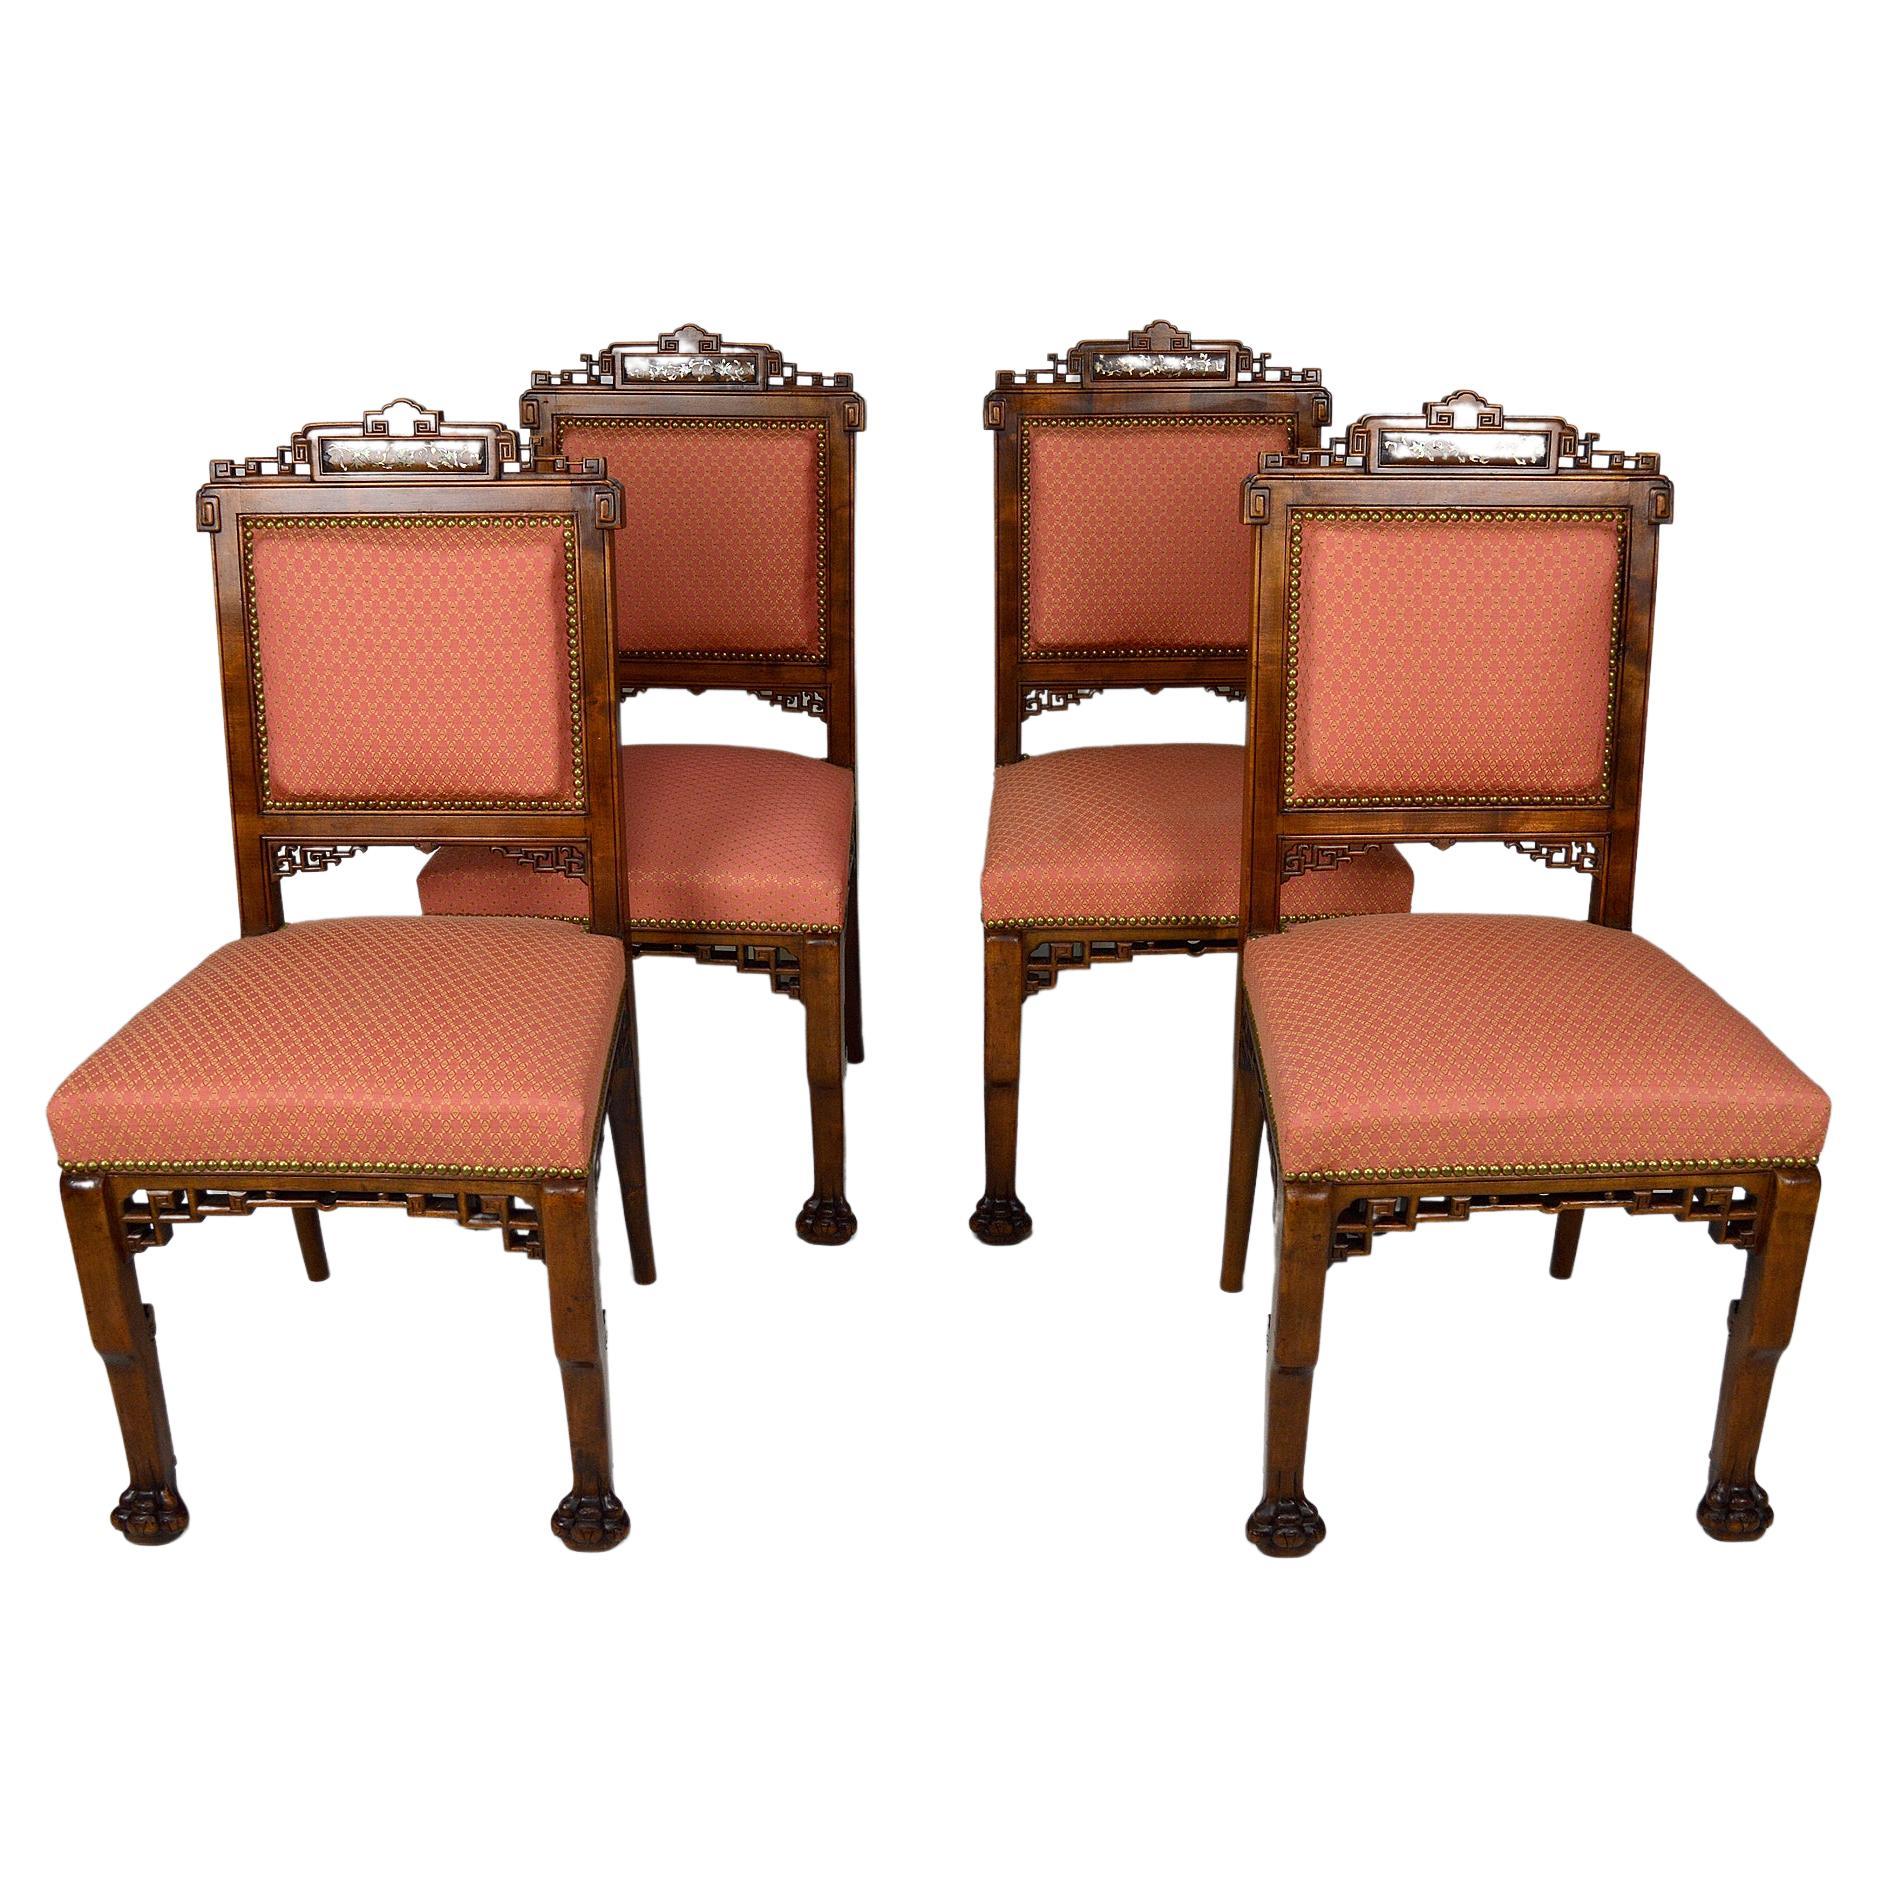 Japanese Chairs attributed to Gabriel Viardot, France, circa 1880, set of 4